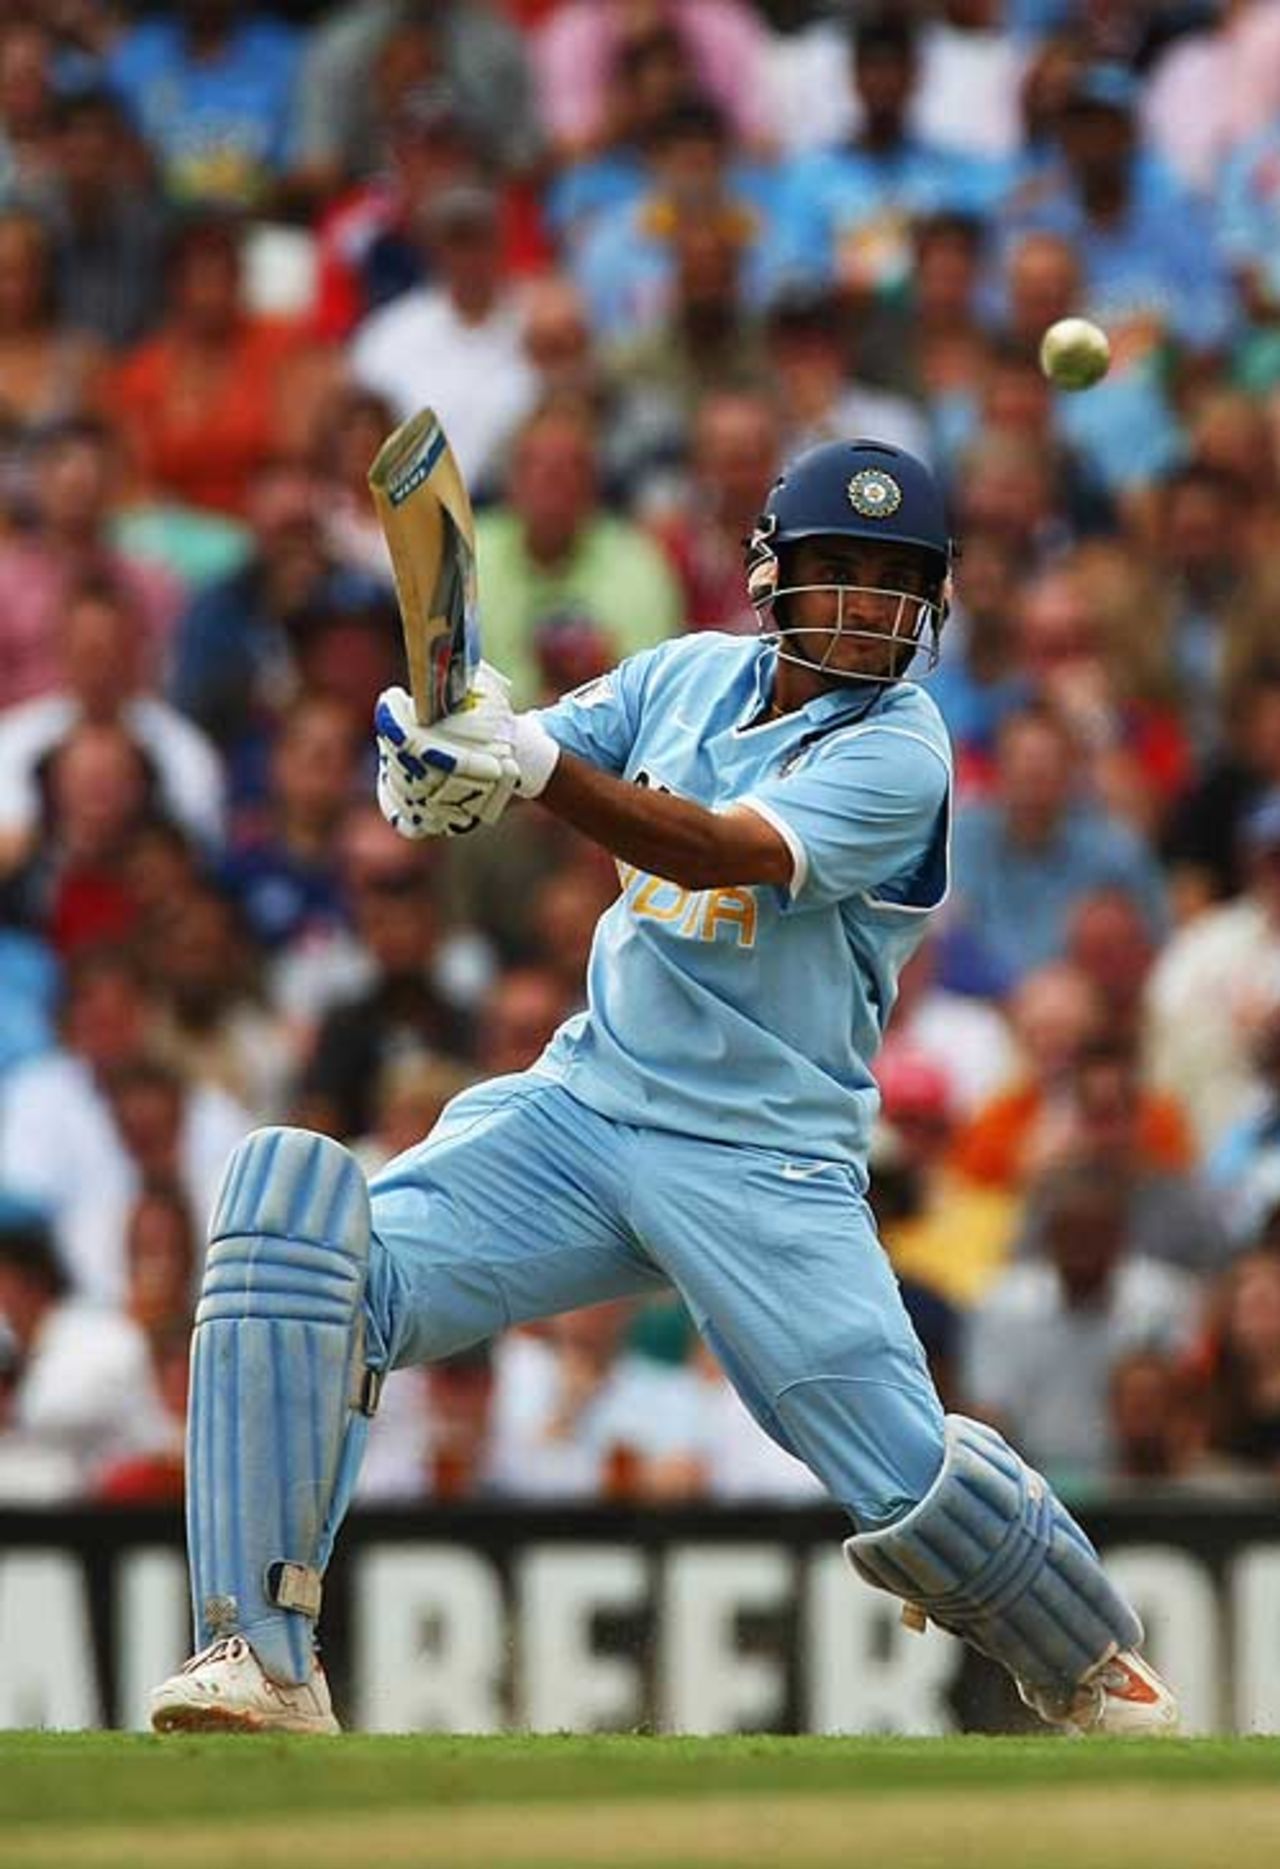 Sourav Ganguly cuts one uppishly on his way to 53, England v India, 6th ODI, The Oval, September 5, 2007